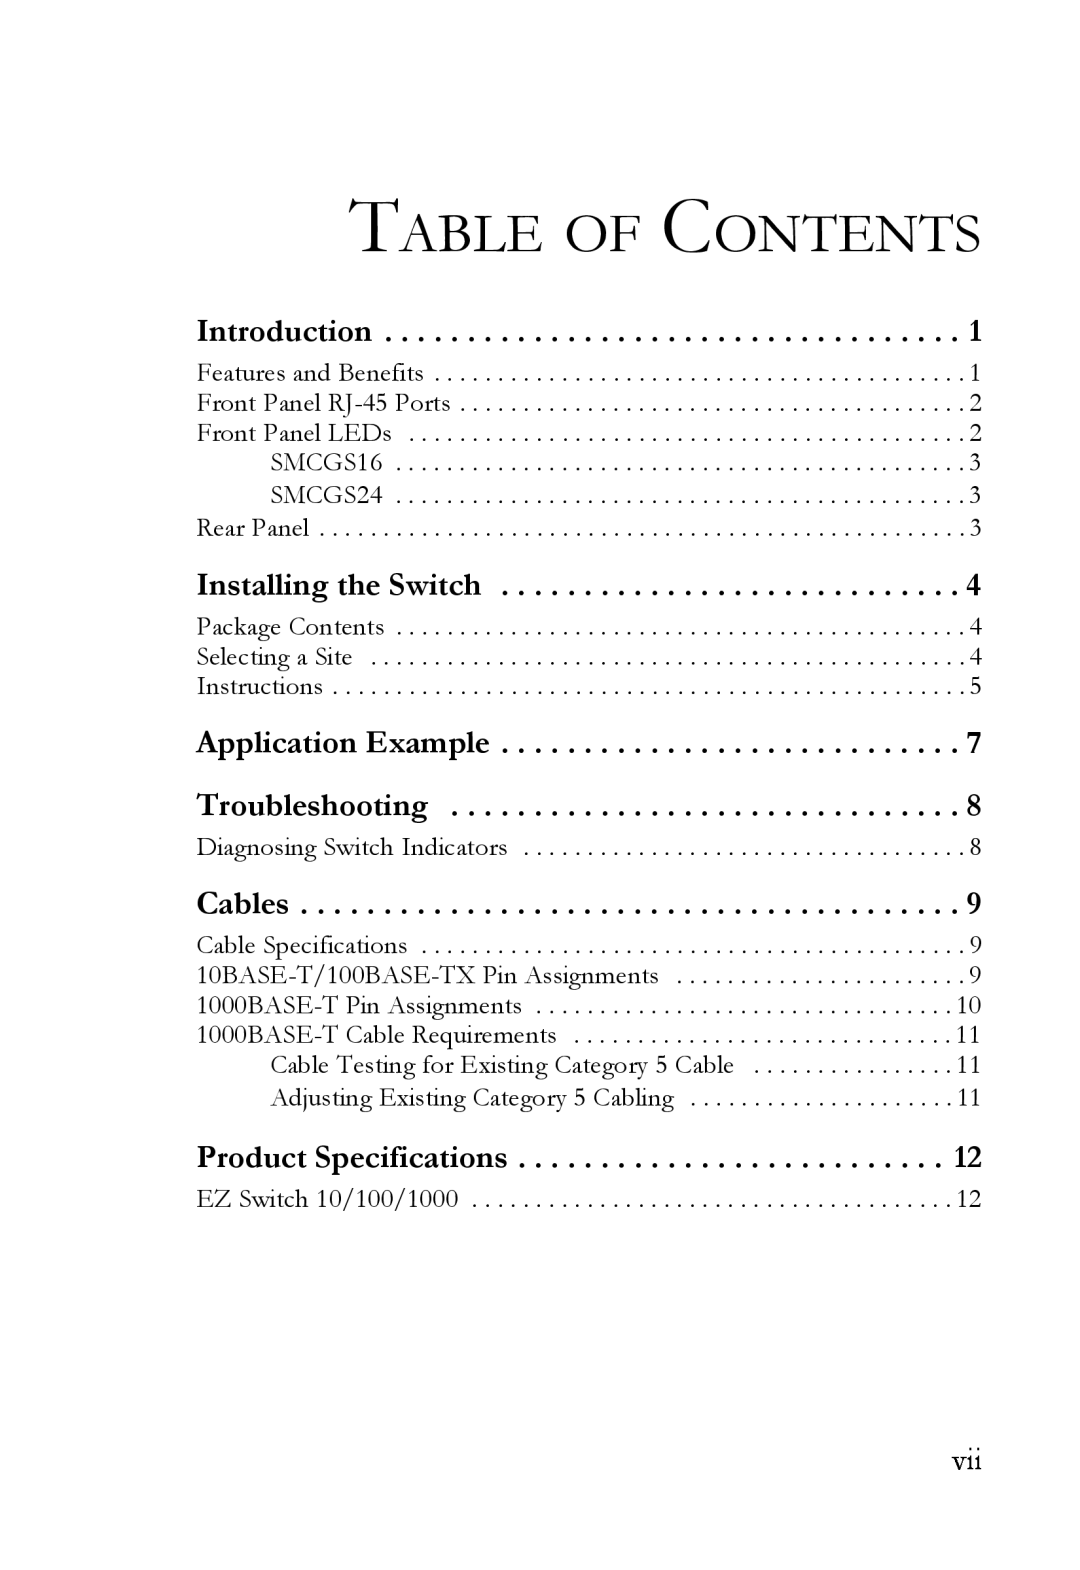 SMC Networks SMCGS24 manual Table Of Contents, Introduction, Installing the Switch, Cables, Product Specifications 